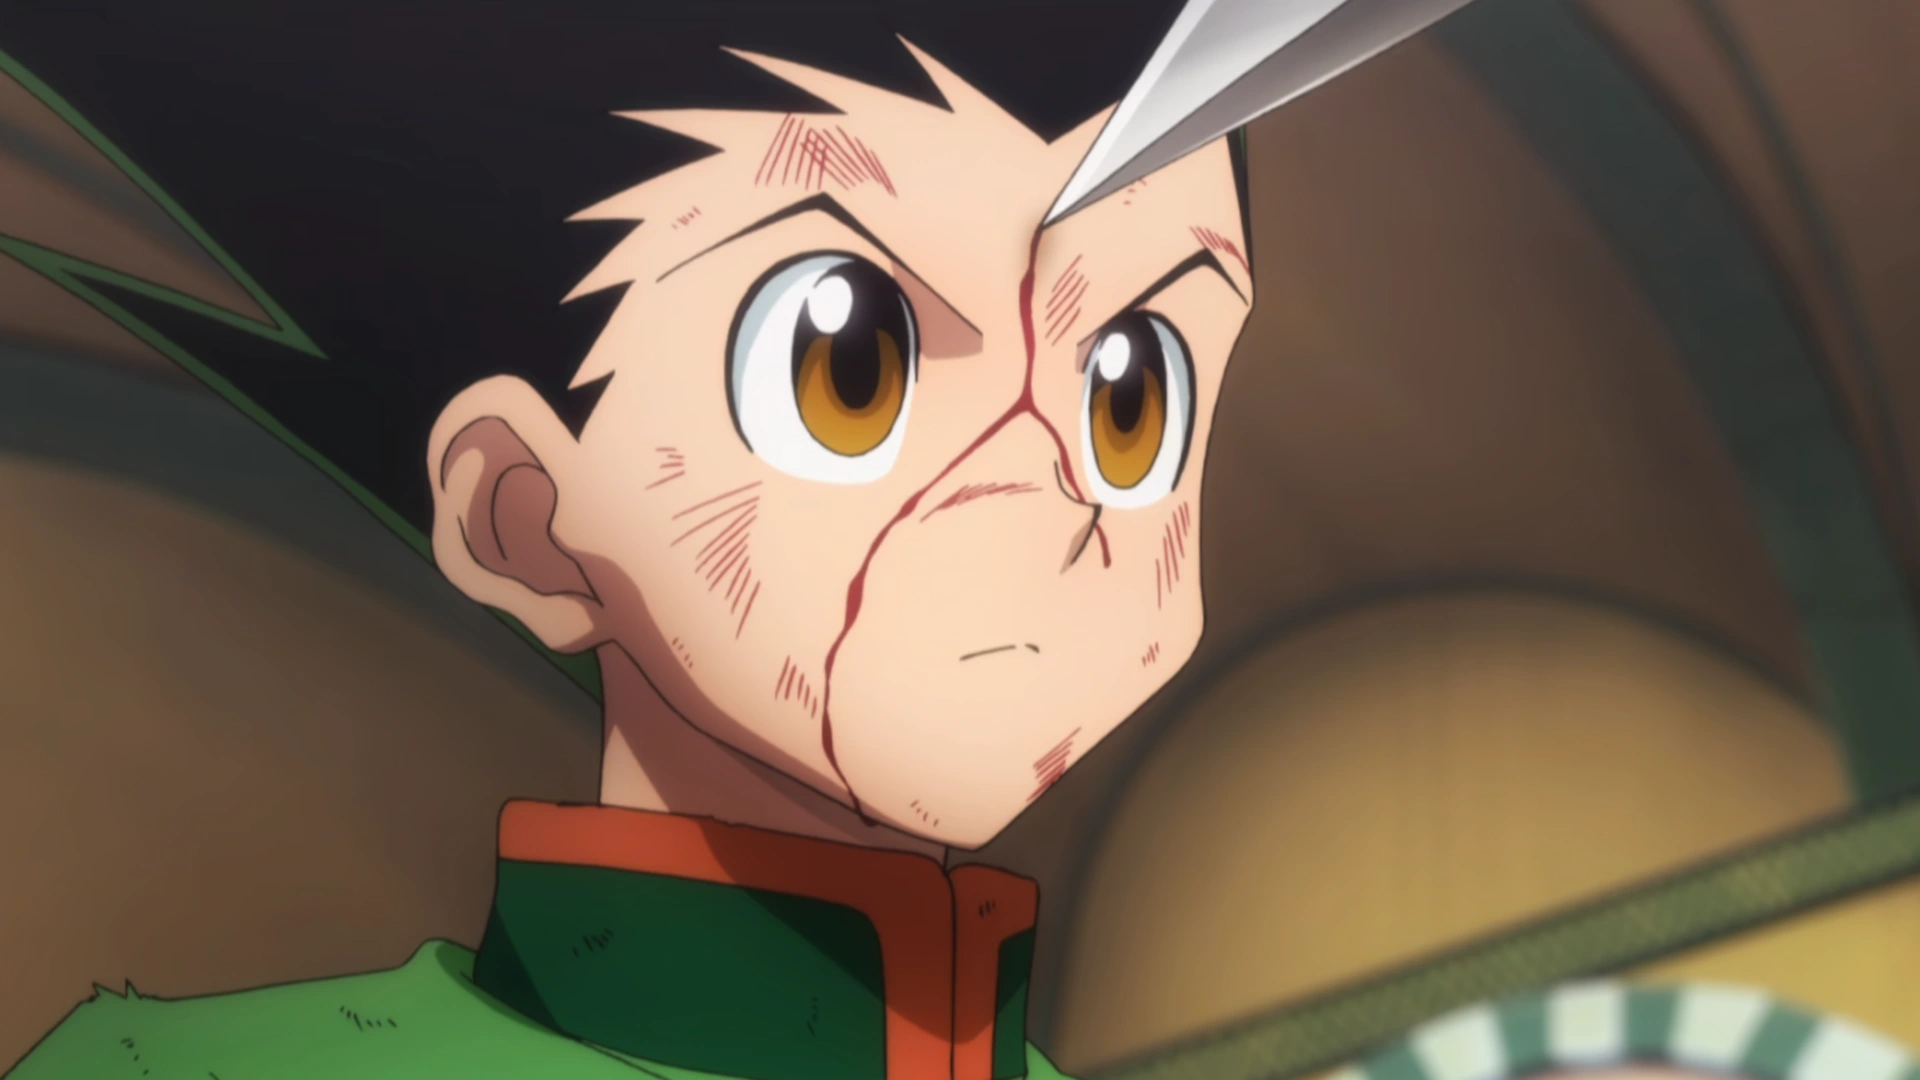 Tutorial: How To Draw Gon Freecs from Hunter X Hunter - Step By Step! -  YouTube